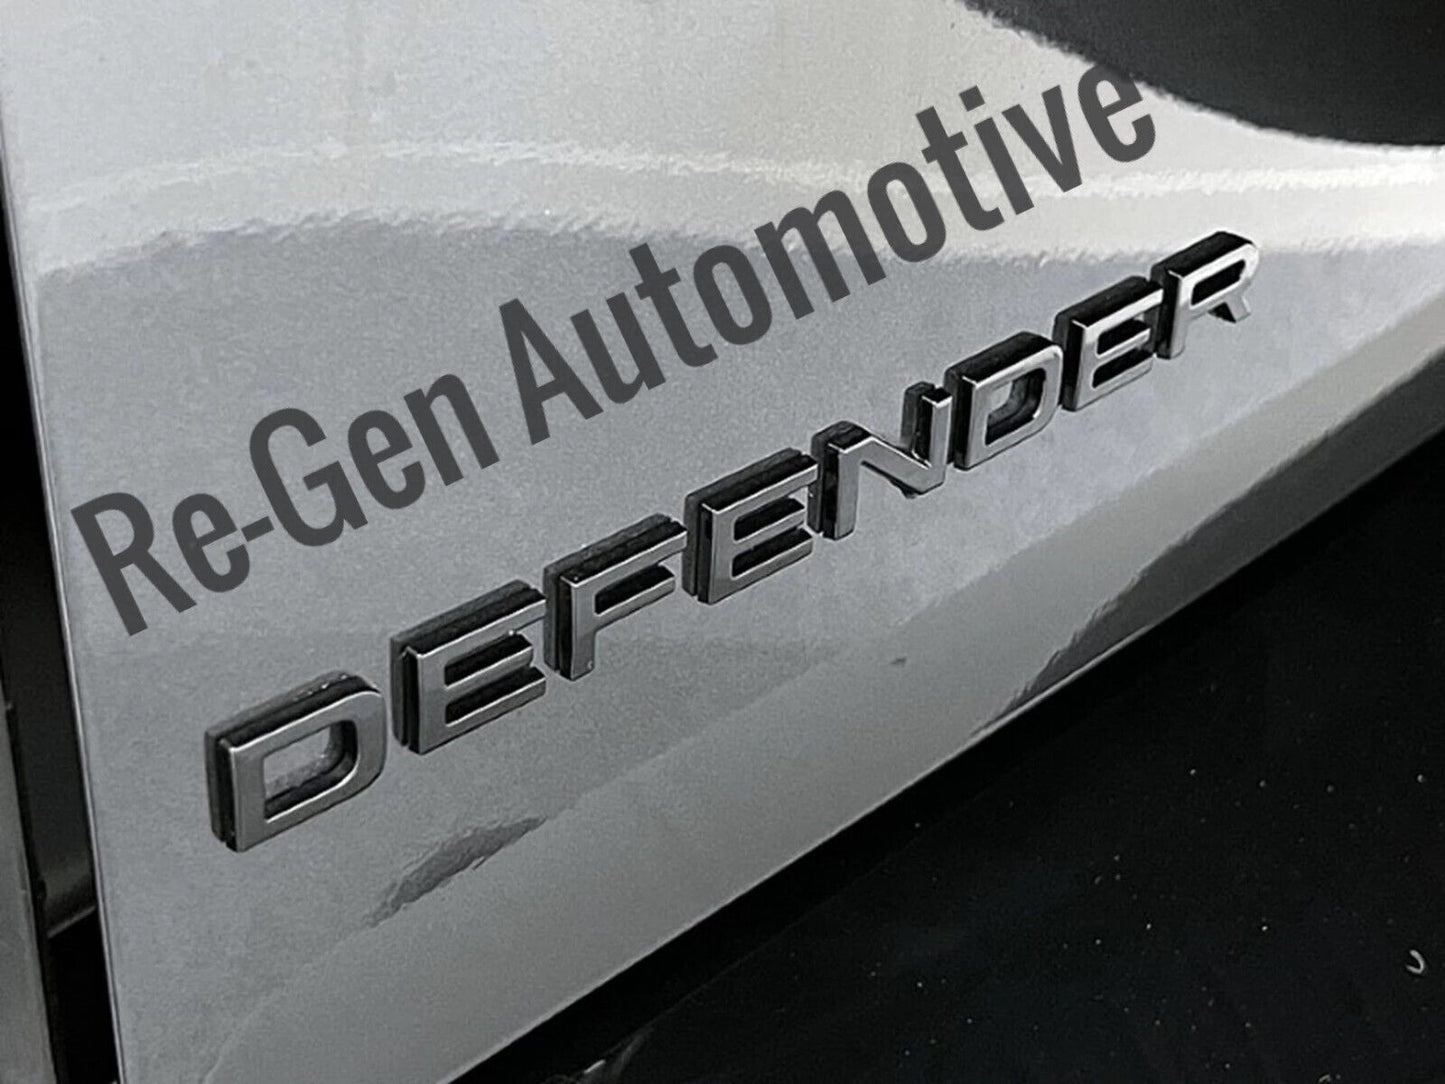 NEW DEFENDER REAR DOOR TAILGATE LETTERS / BADGES GLOSS BLACK ABS SELF ADHESIVE